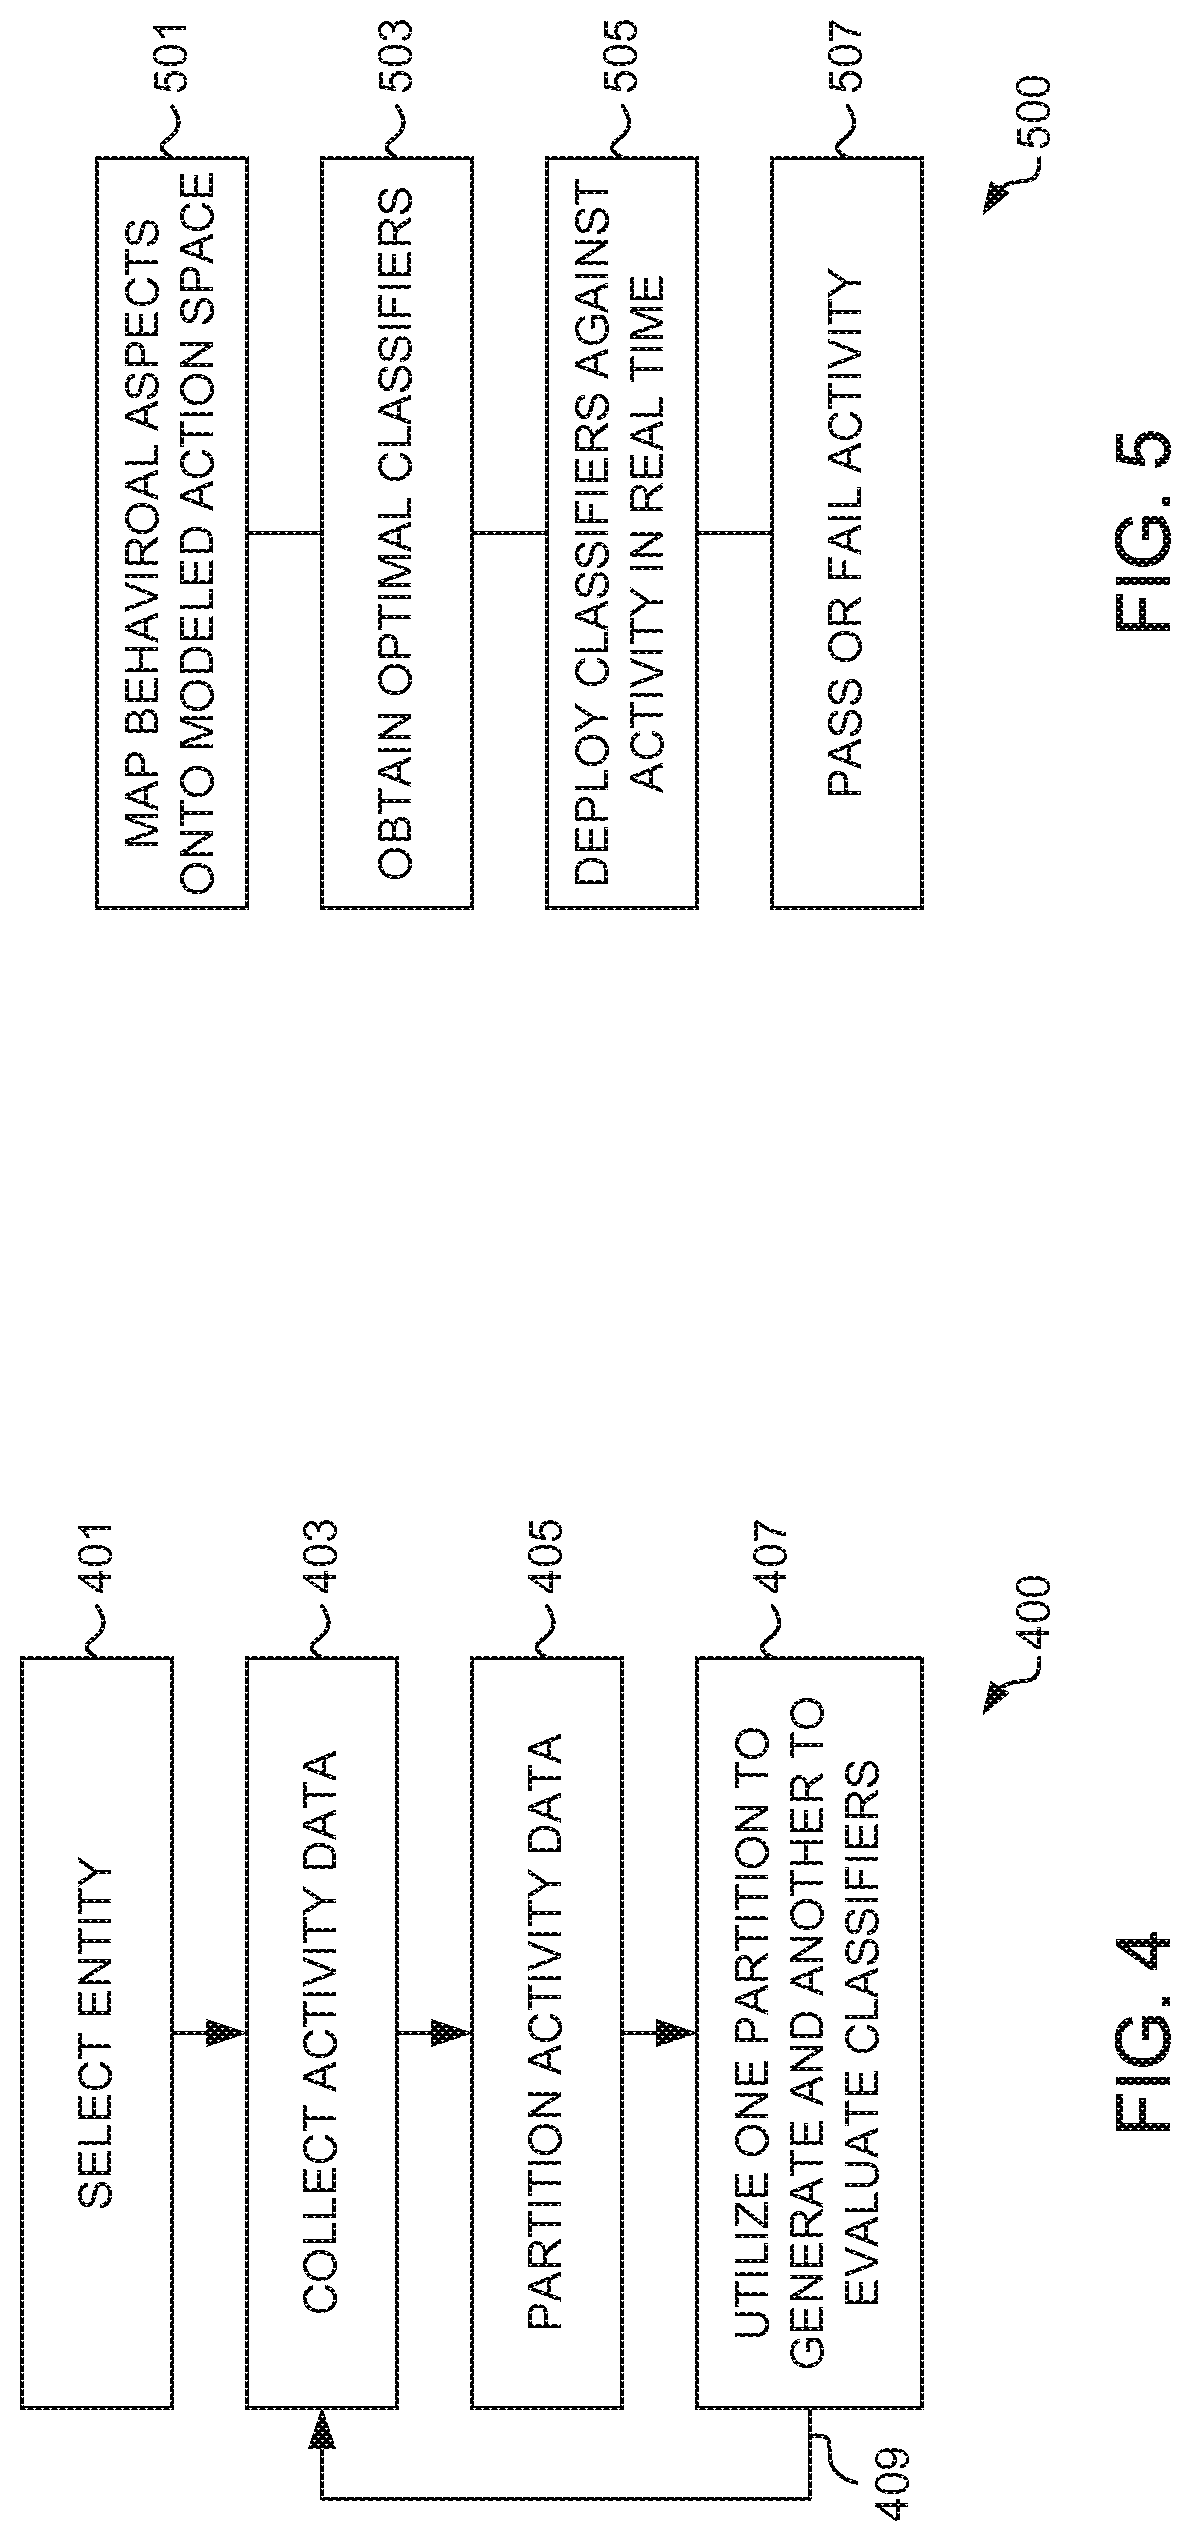 System and method for network security based on a user's computer network activity data